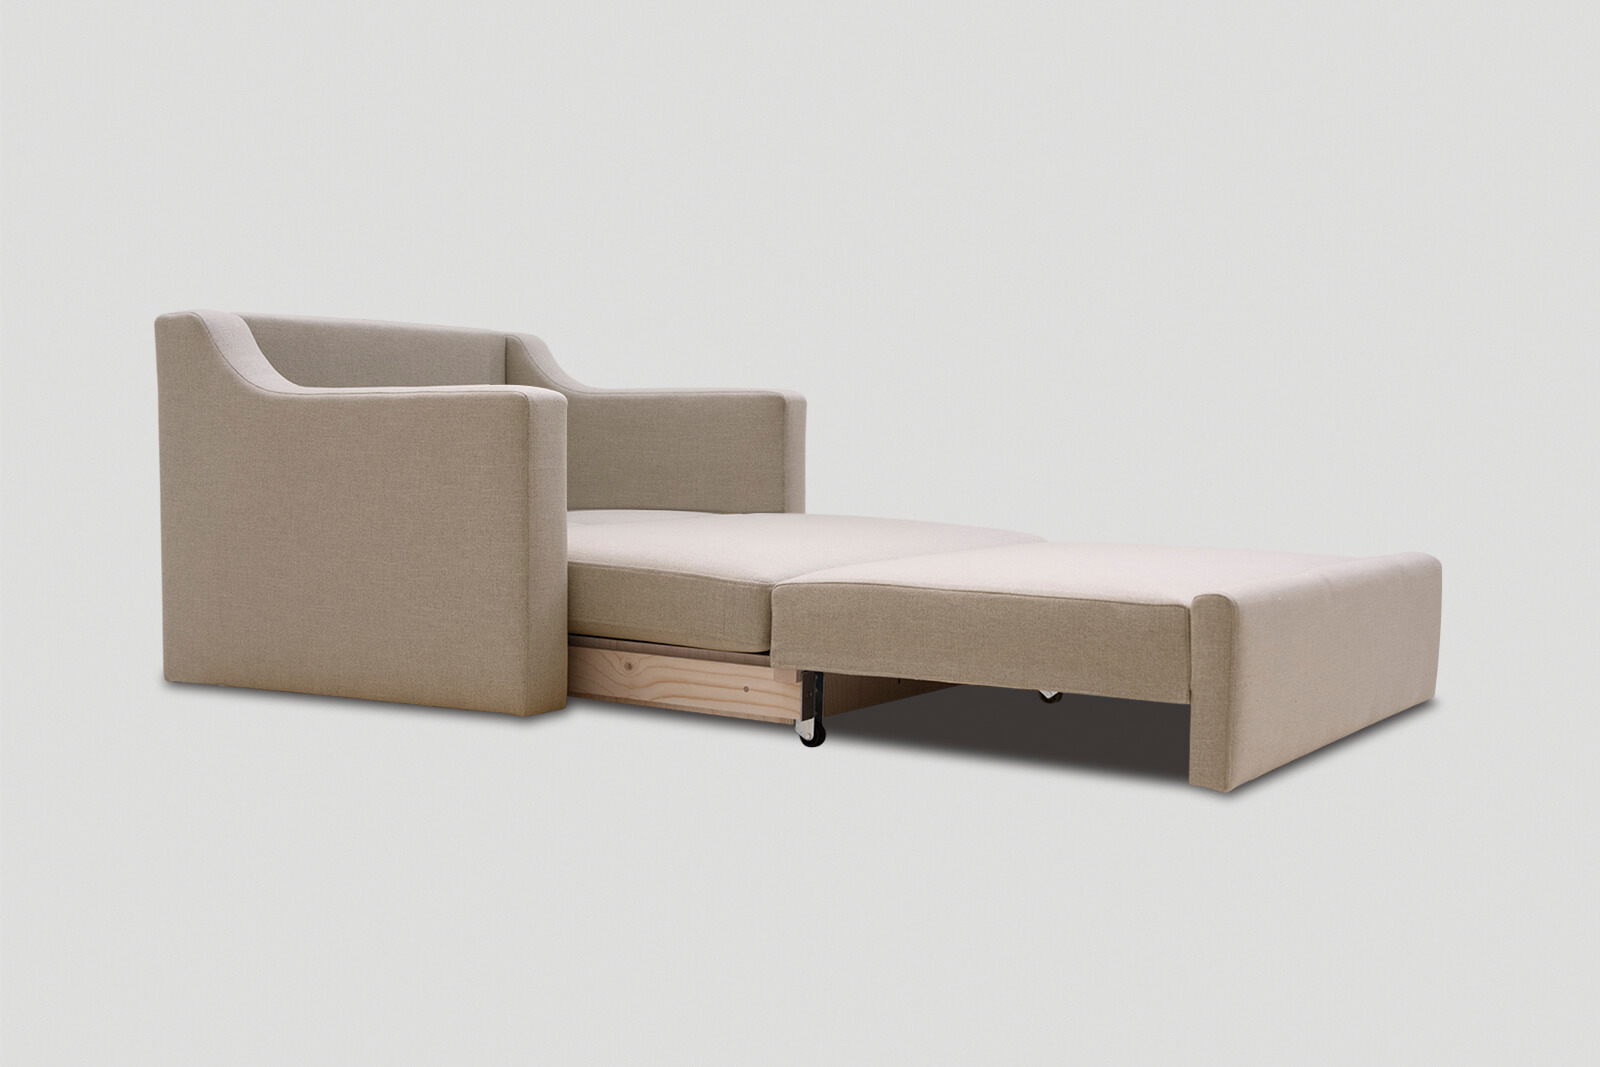 HBSB02-single-sofa-bed-coconut-3q-bed